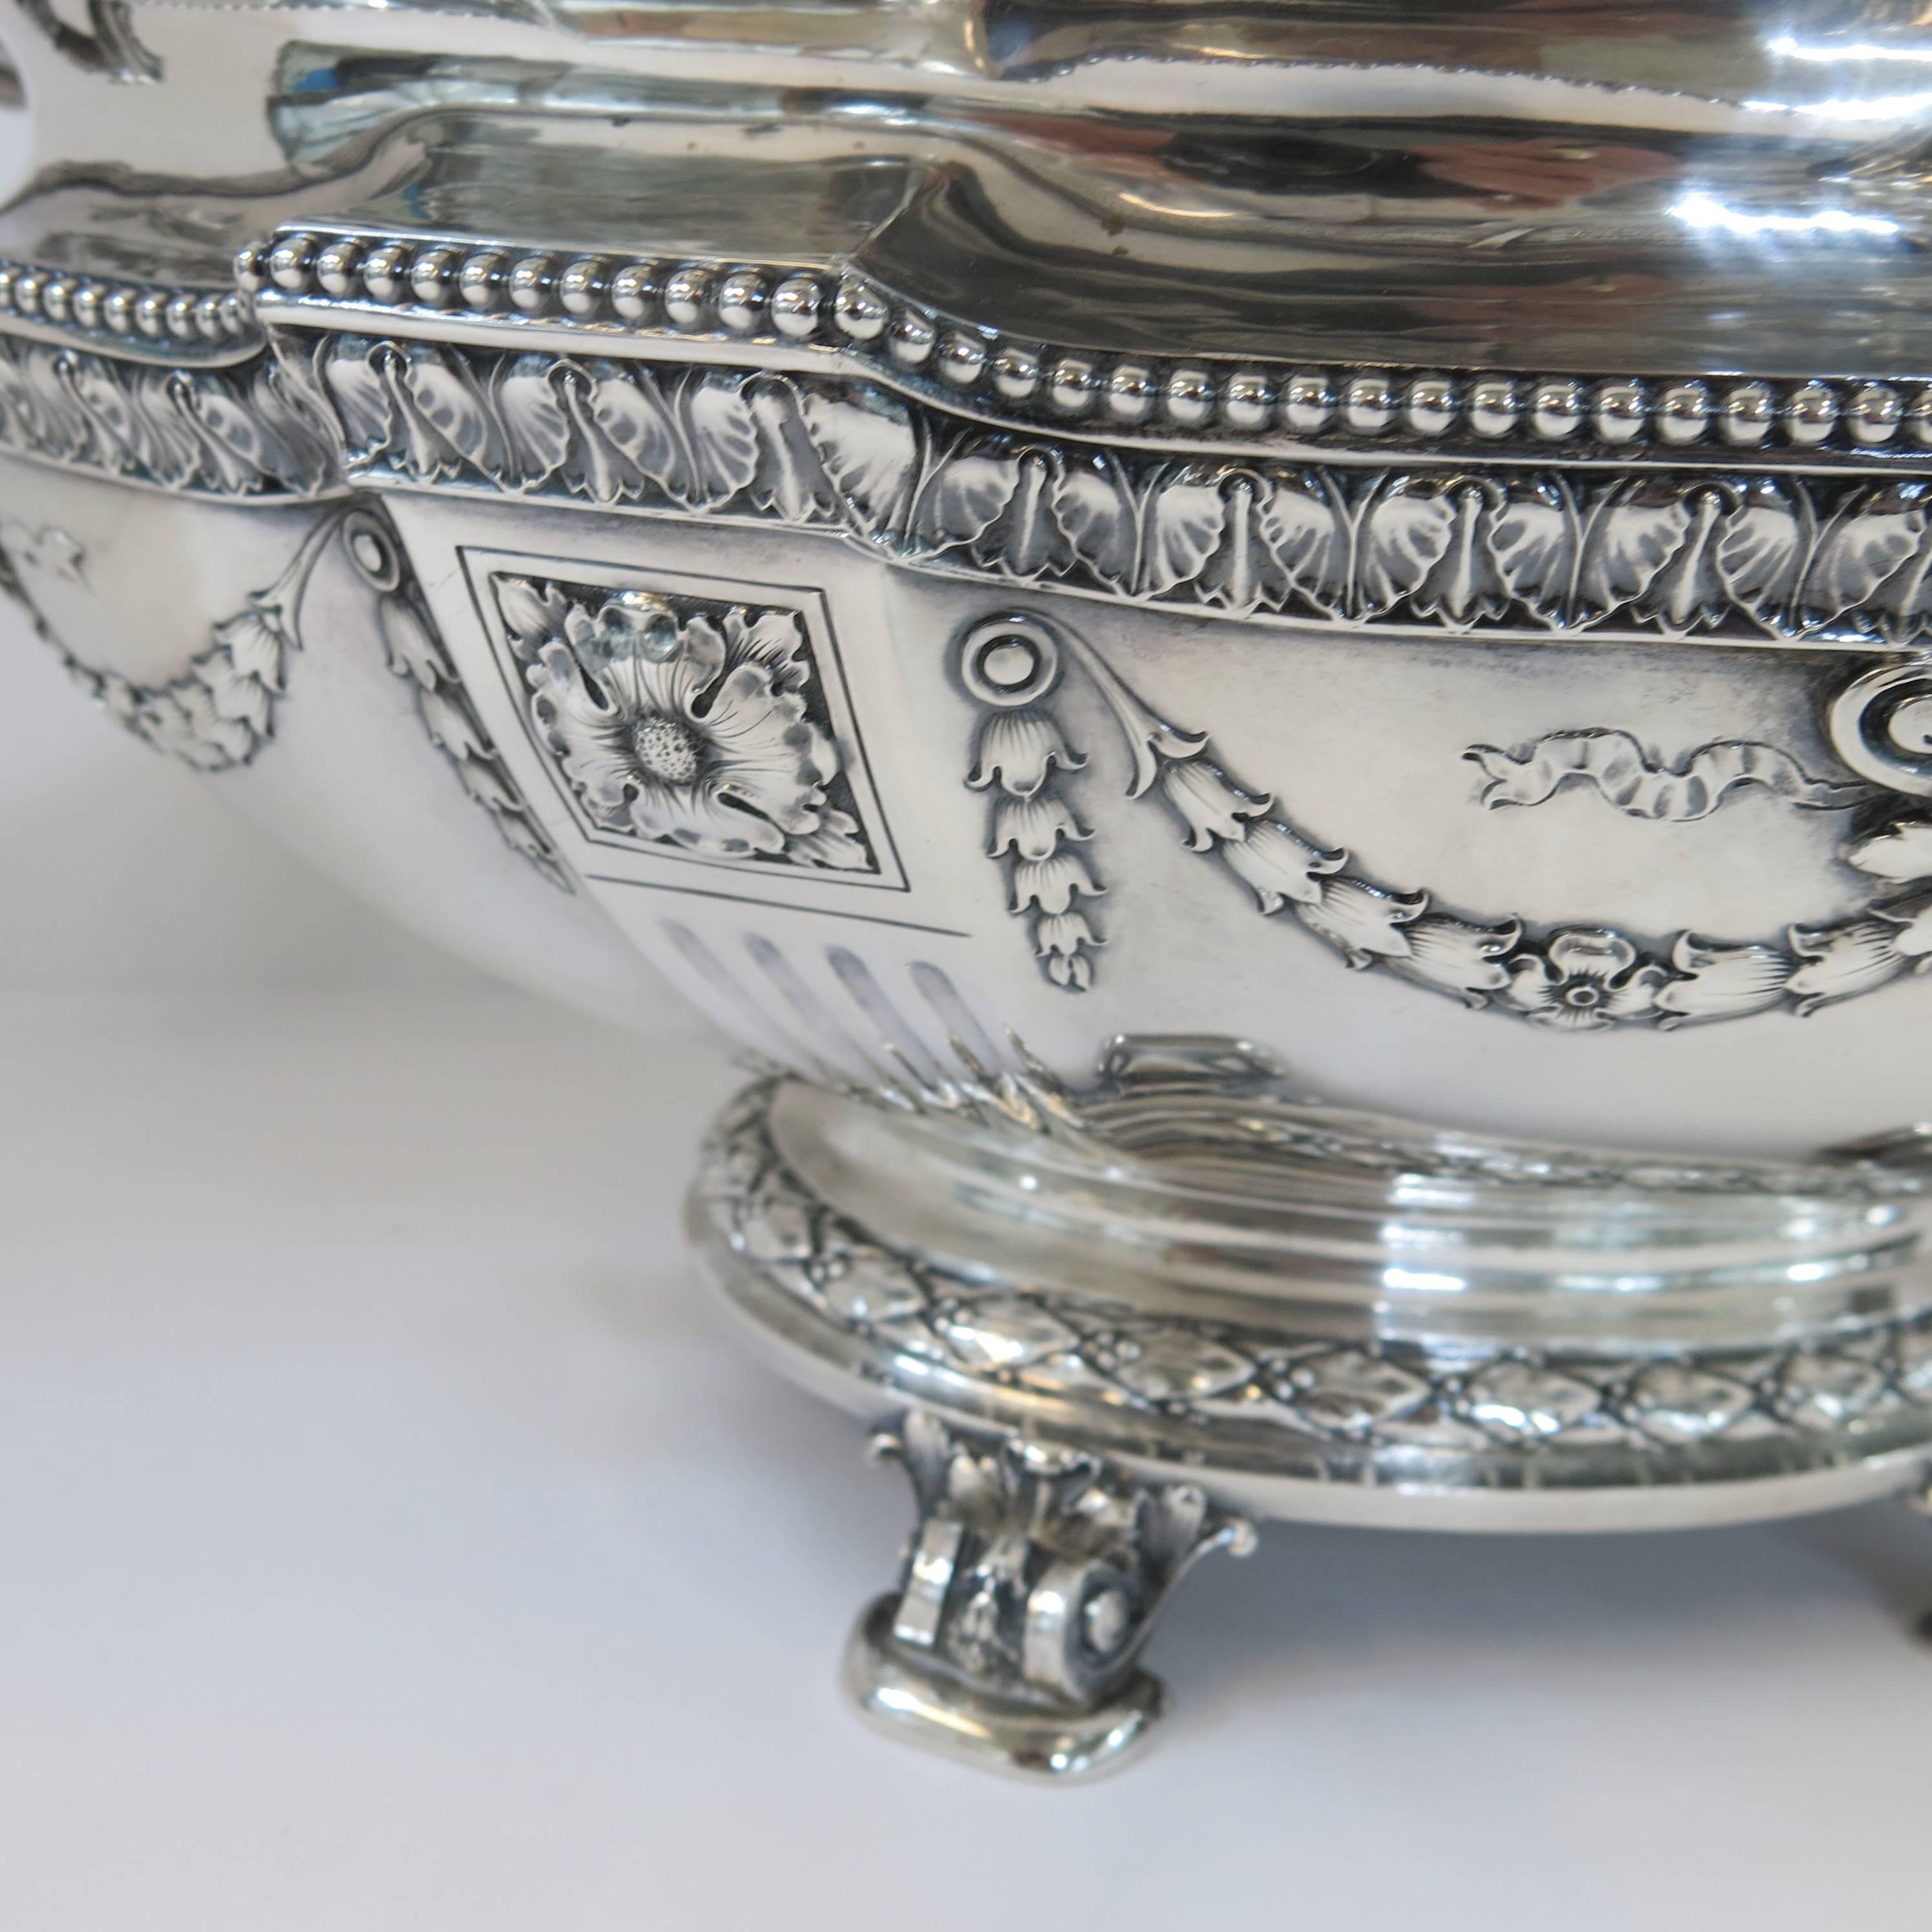 A stunning, large oval centrepiece bowl made by Gorham & co, circa 1900. The large oval bowl with hand chased and applied cast decoration. Standing on four cast feet. To add to the grandeur of the bowl are four cast and applied handles, back and